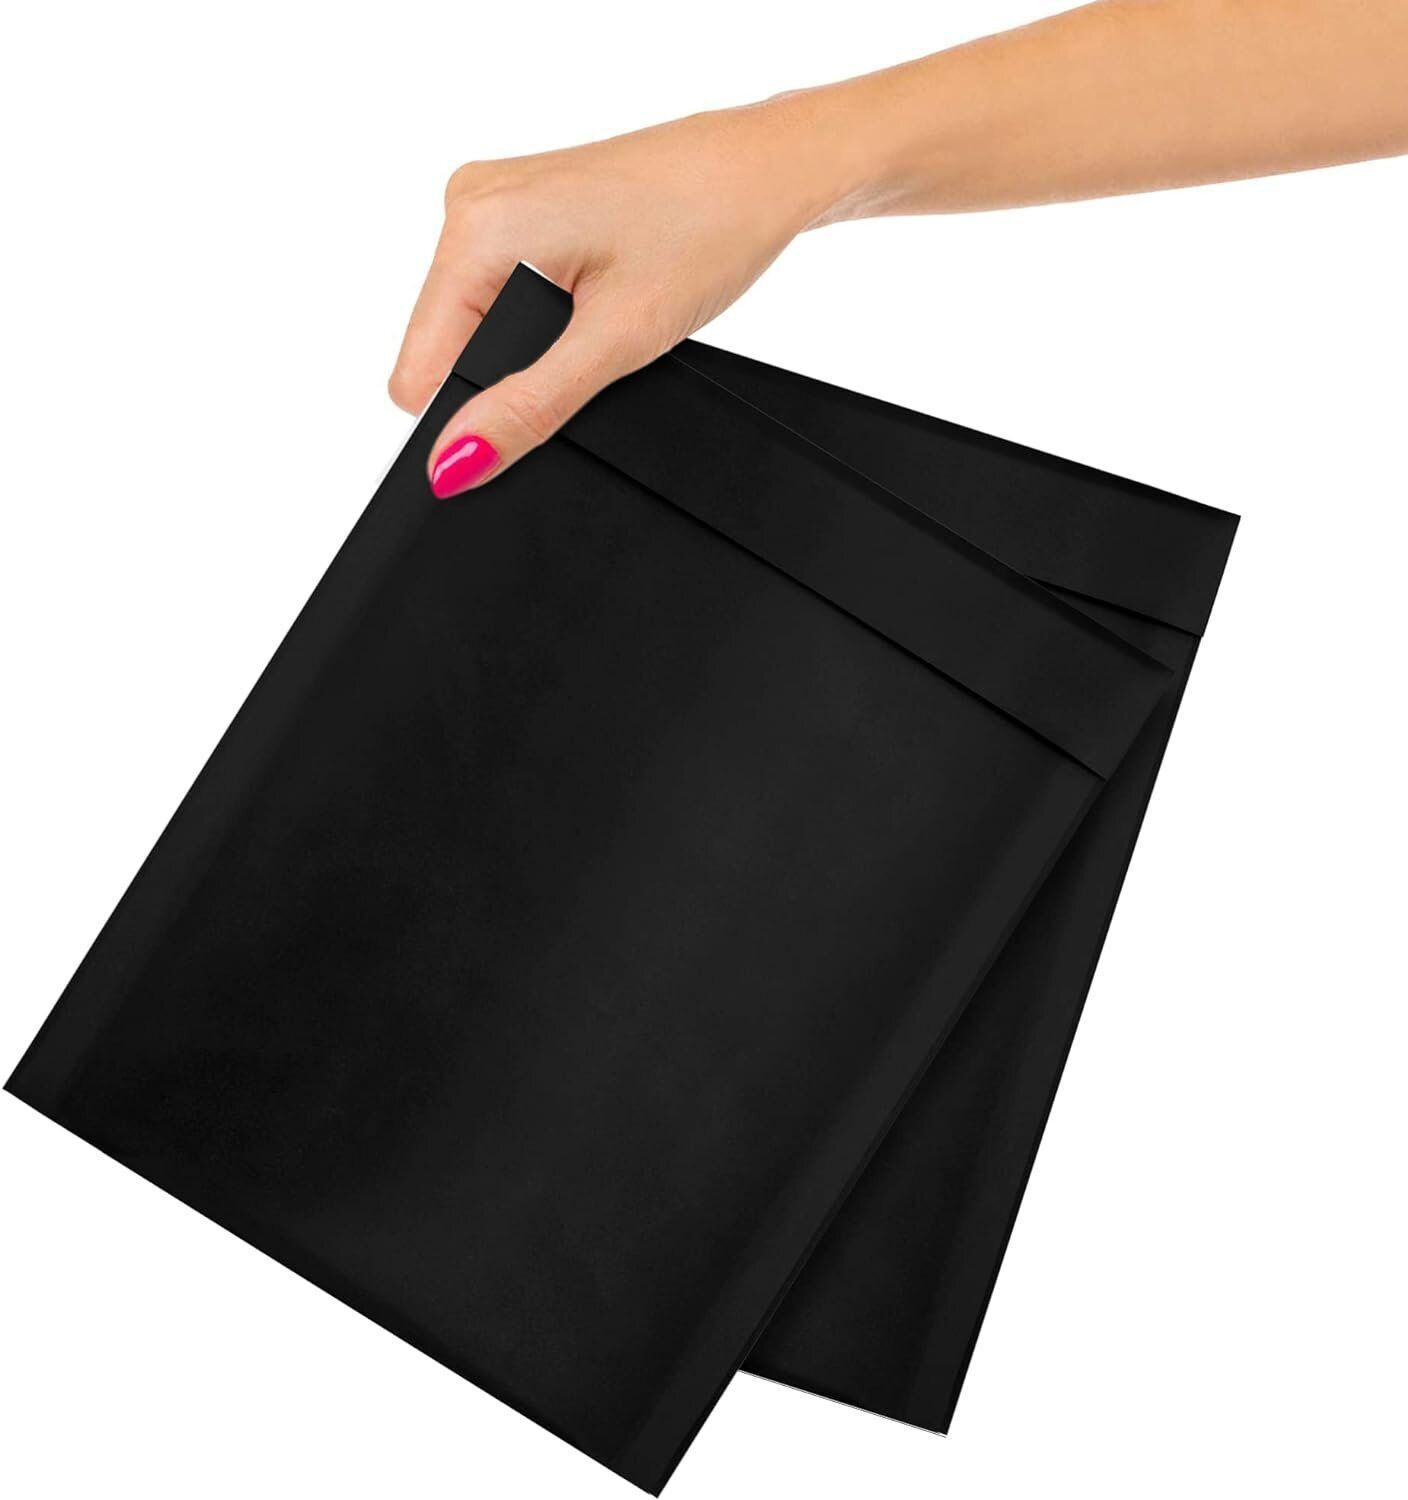 Primary image for 6.5x9 BLACK Kraft Bubble Mailers Padded Shipping Envelopes Bubble 25pcs